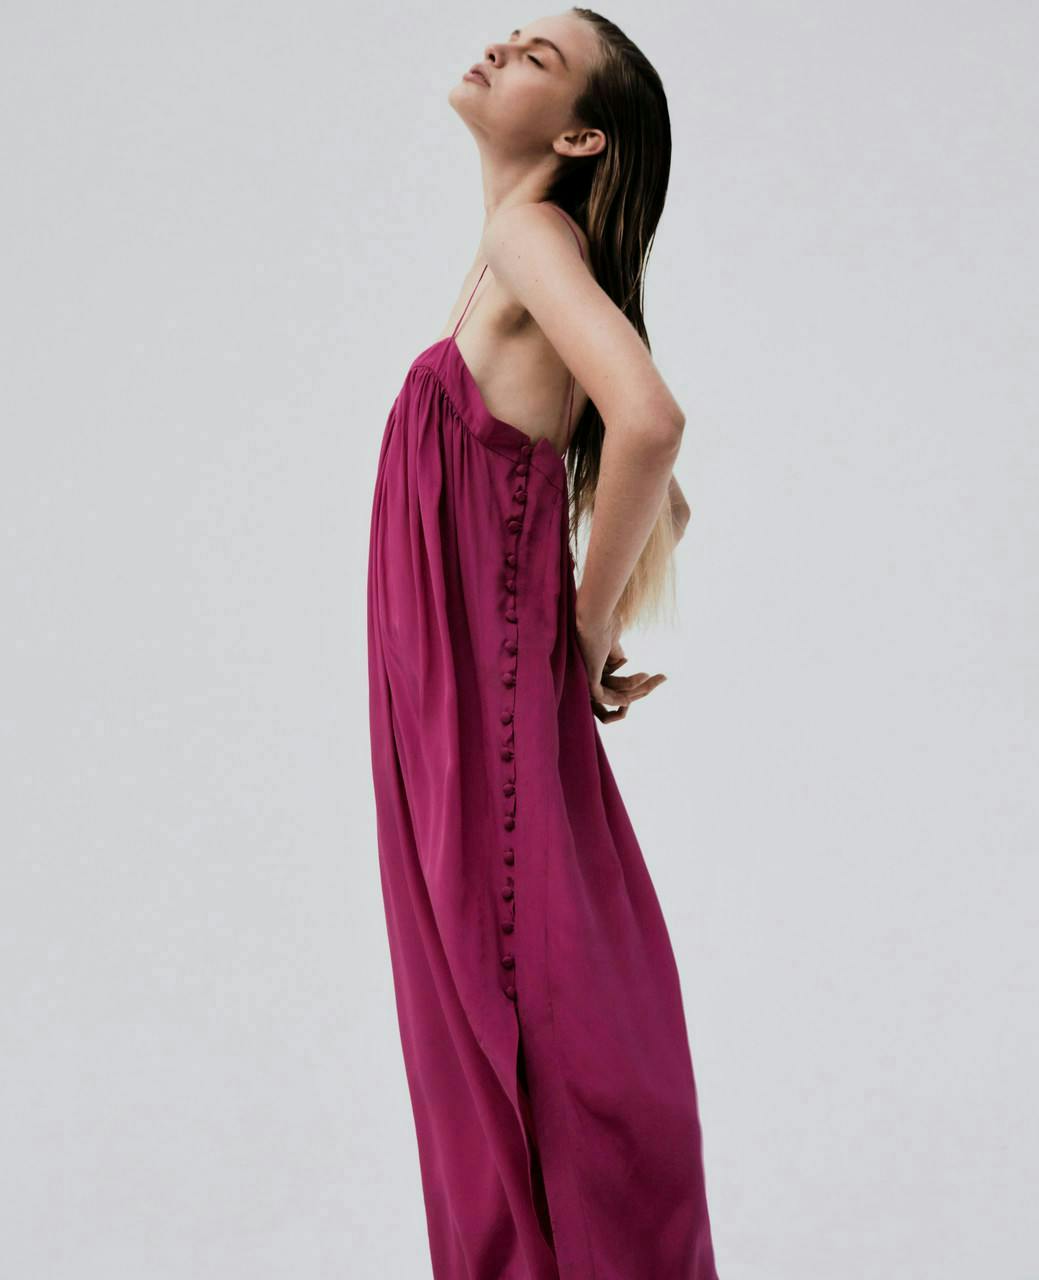 clothing apparel evening dress robe fashion gown person human